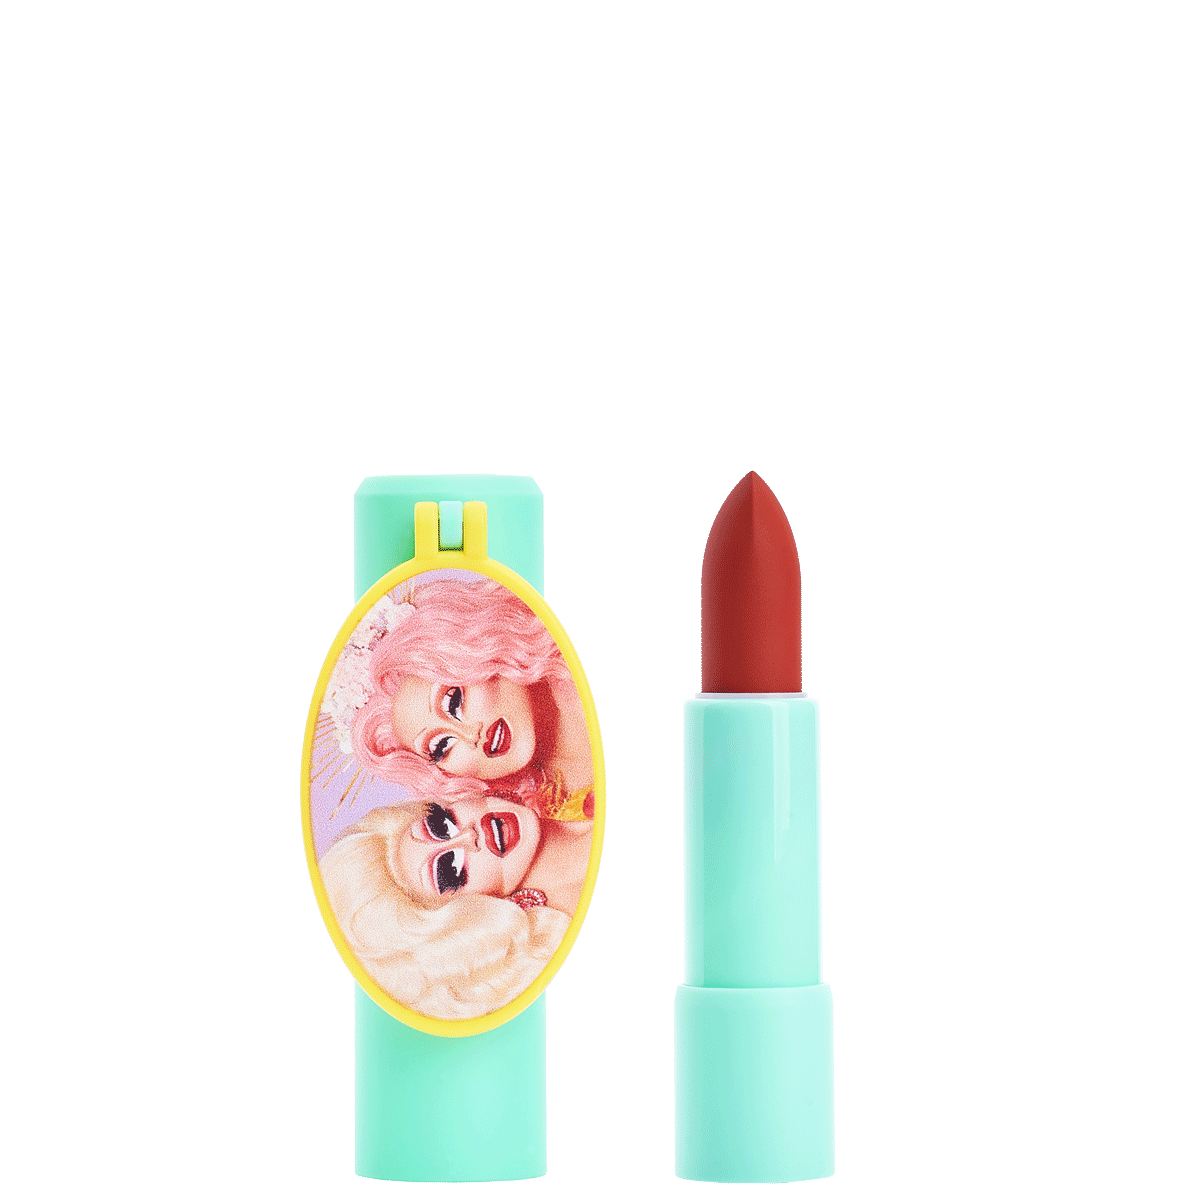 BFF4EVR LOLIPS LIPSTICK - OUTLET KIMCHI CHIC X TRIXIE MATTEL